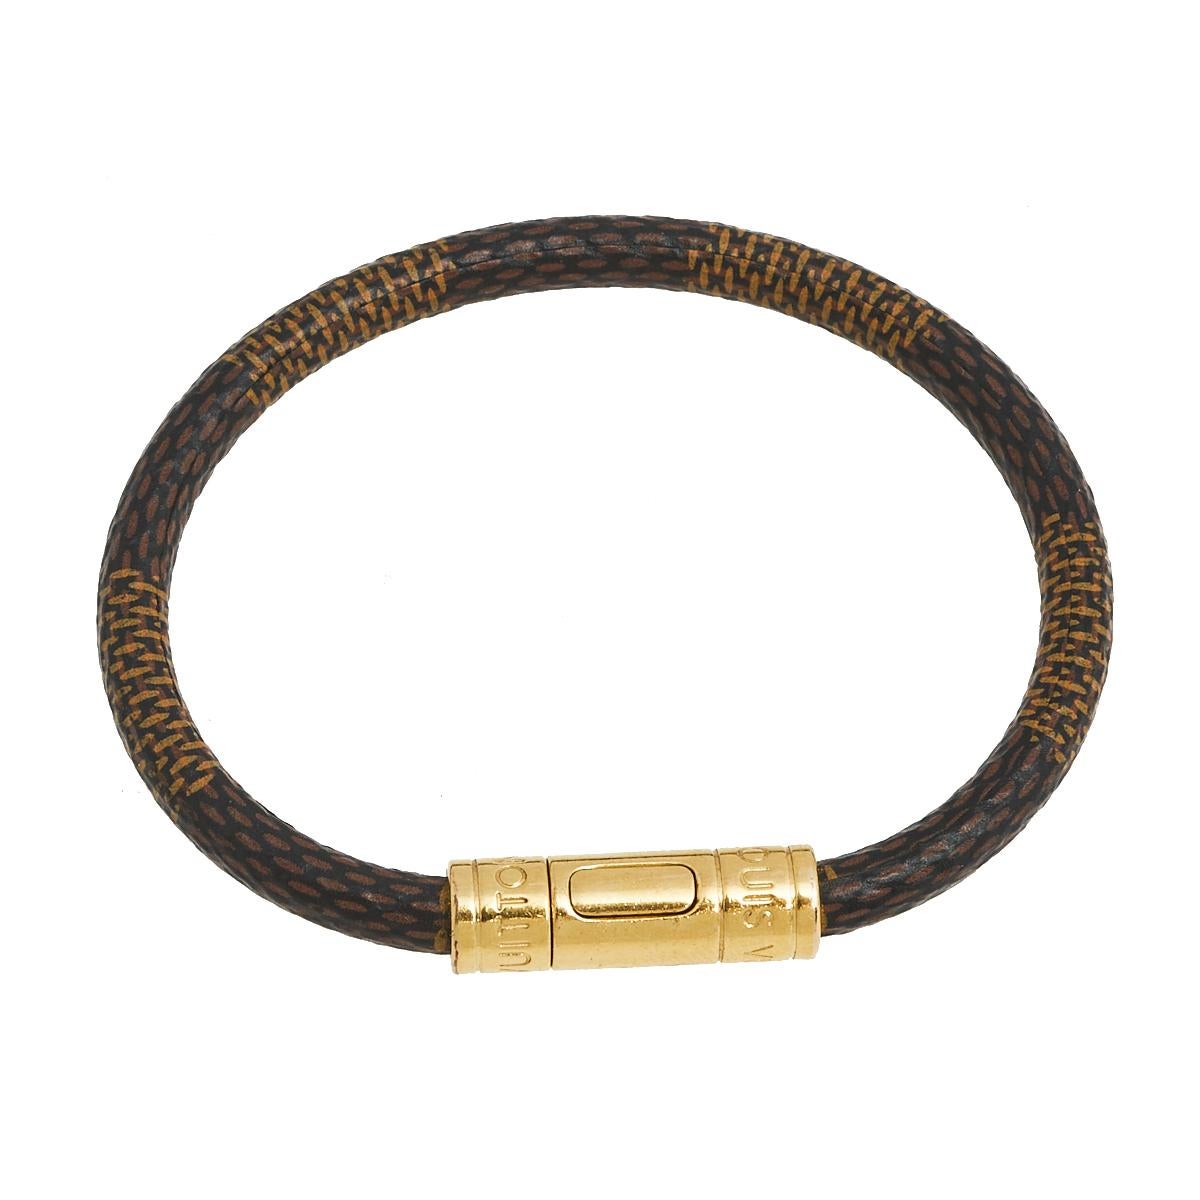 Simple yet elegant, this Louis Vuitton Keep It bracelet is designed with the label's Damier Ebene canvas and features a gold-tone metal closure. Wear it as a stand-alone piece or stack it with similar bands for a layered effect.